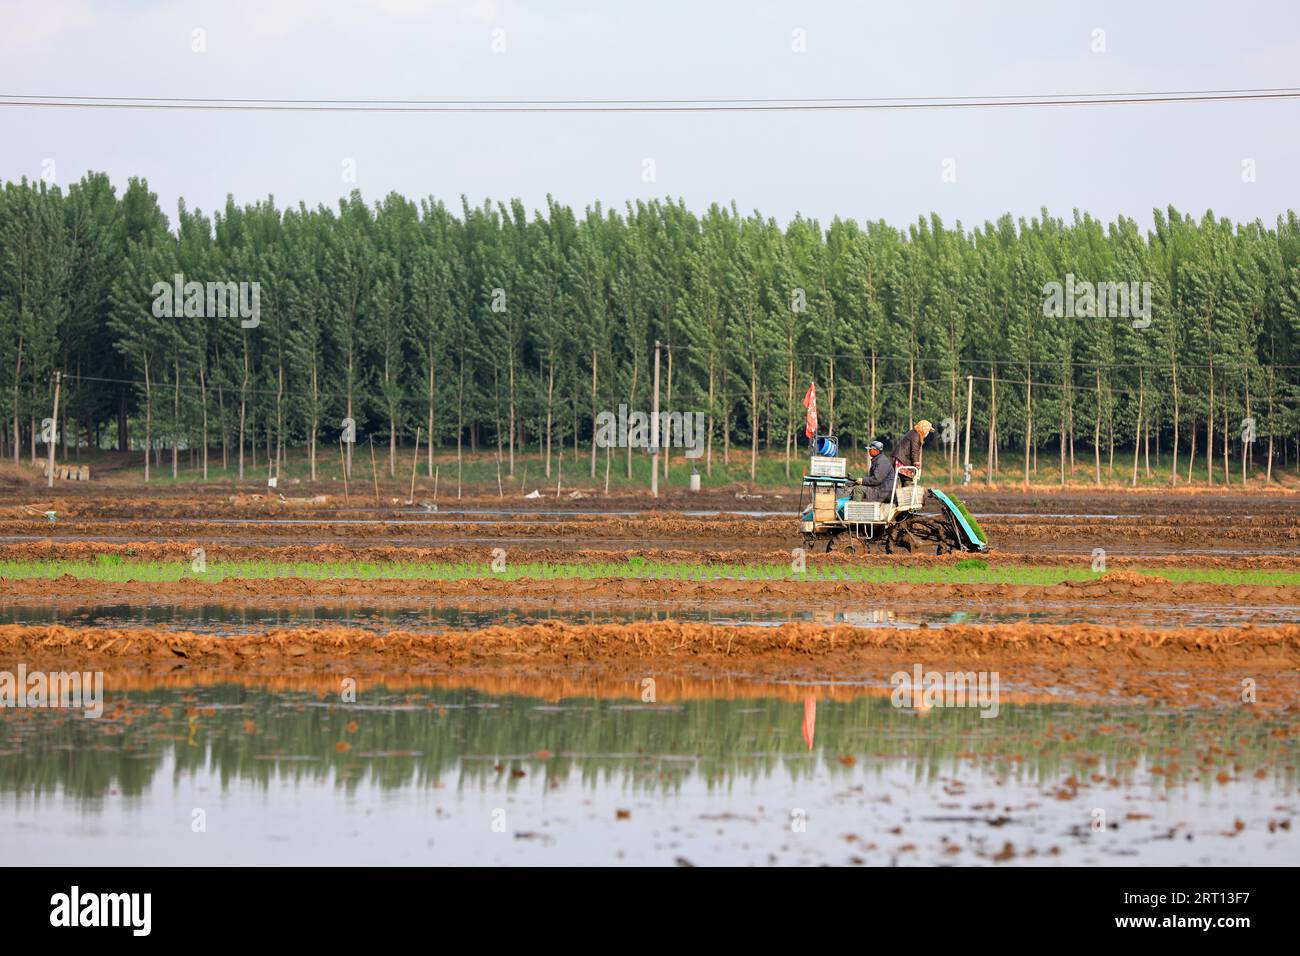 LUANNAN COUNTY, Hebei Province, China - May 15, 2020: Farmers use rice transplanters to grow rice in paddy fields. Stock Photo